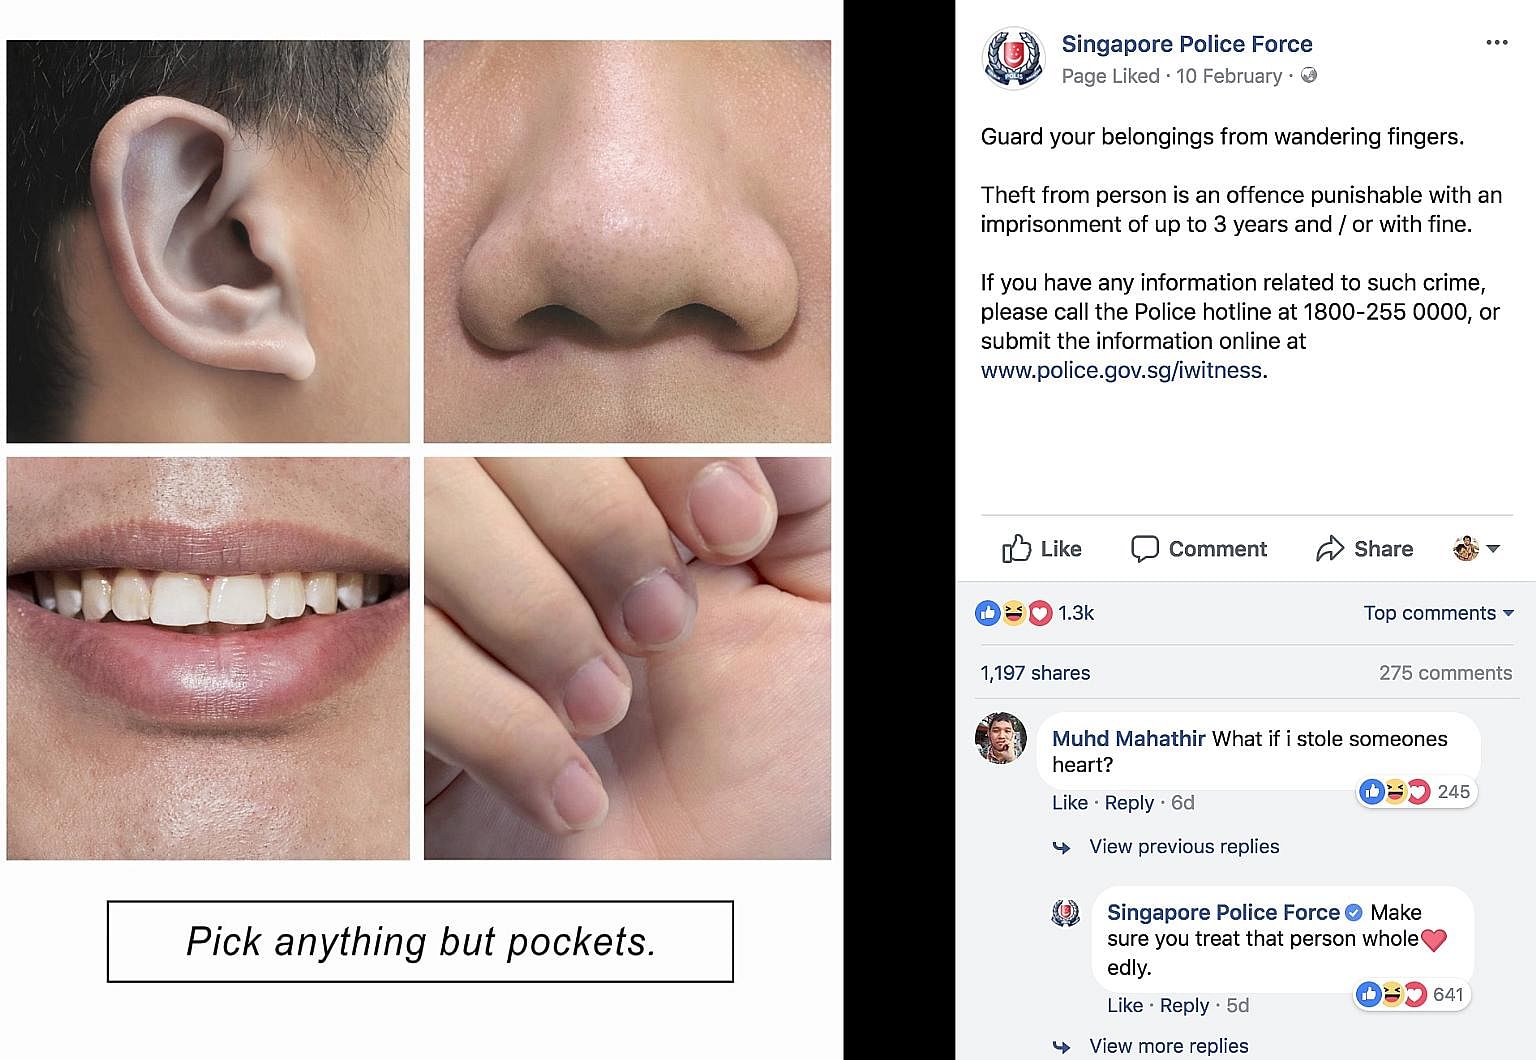 Humorous posts such as this one on the Singapore Police Force's Facebook page have drawn the attention of its audience and got across the message not to take security and peace for granted.